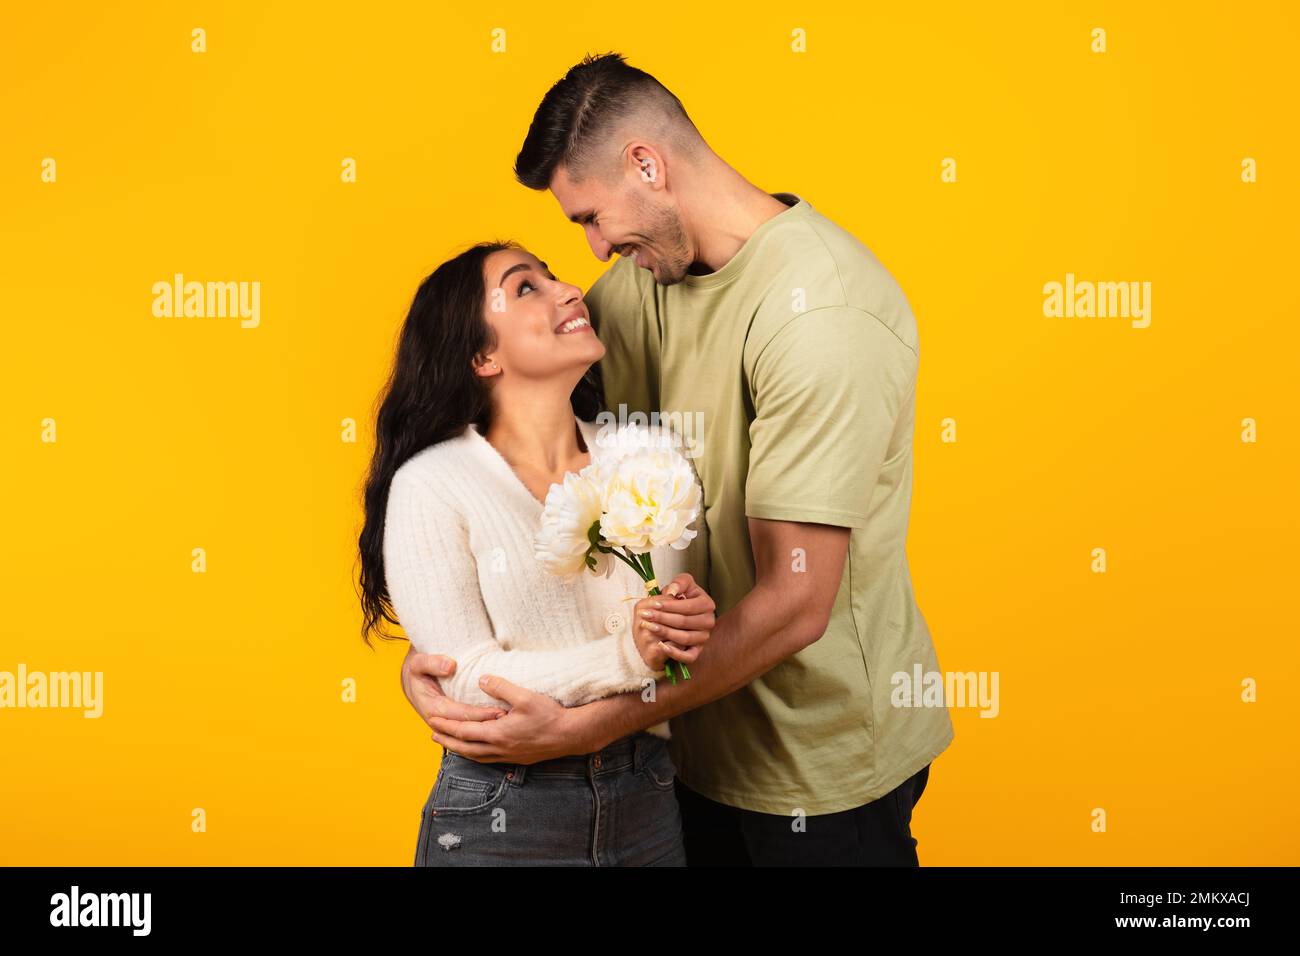 Cheerful young arab guy in casual hugs woman with flowers, enjoy romantic, isolated on yellow background Stock Photo